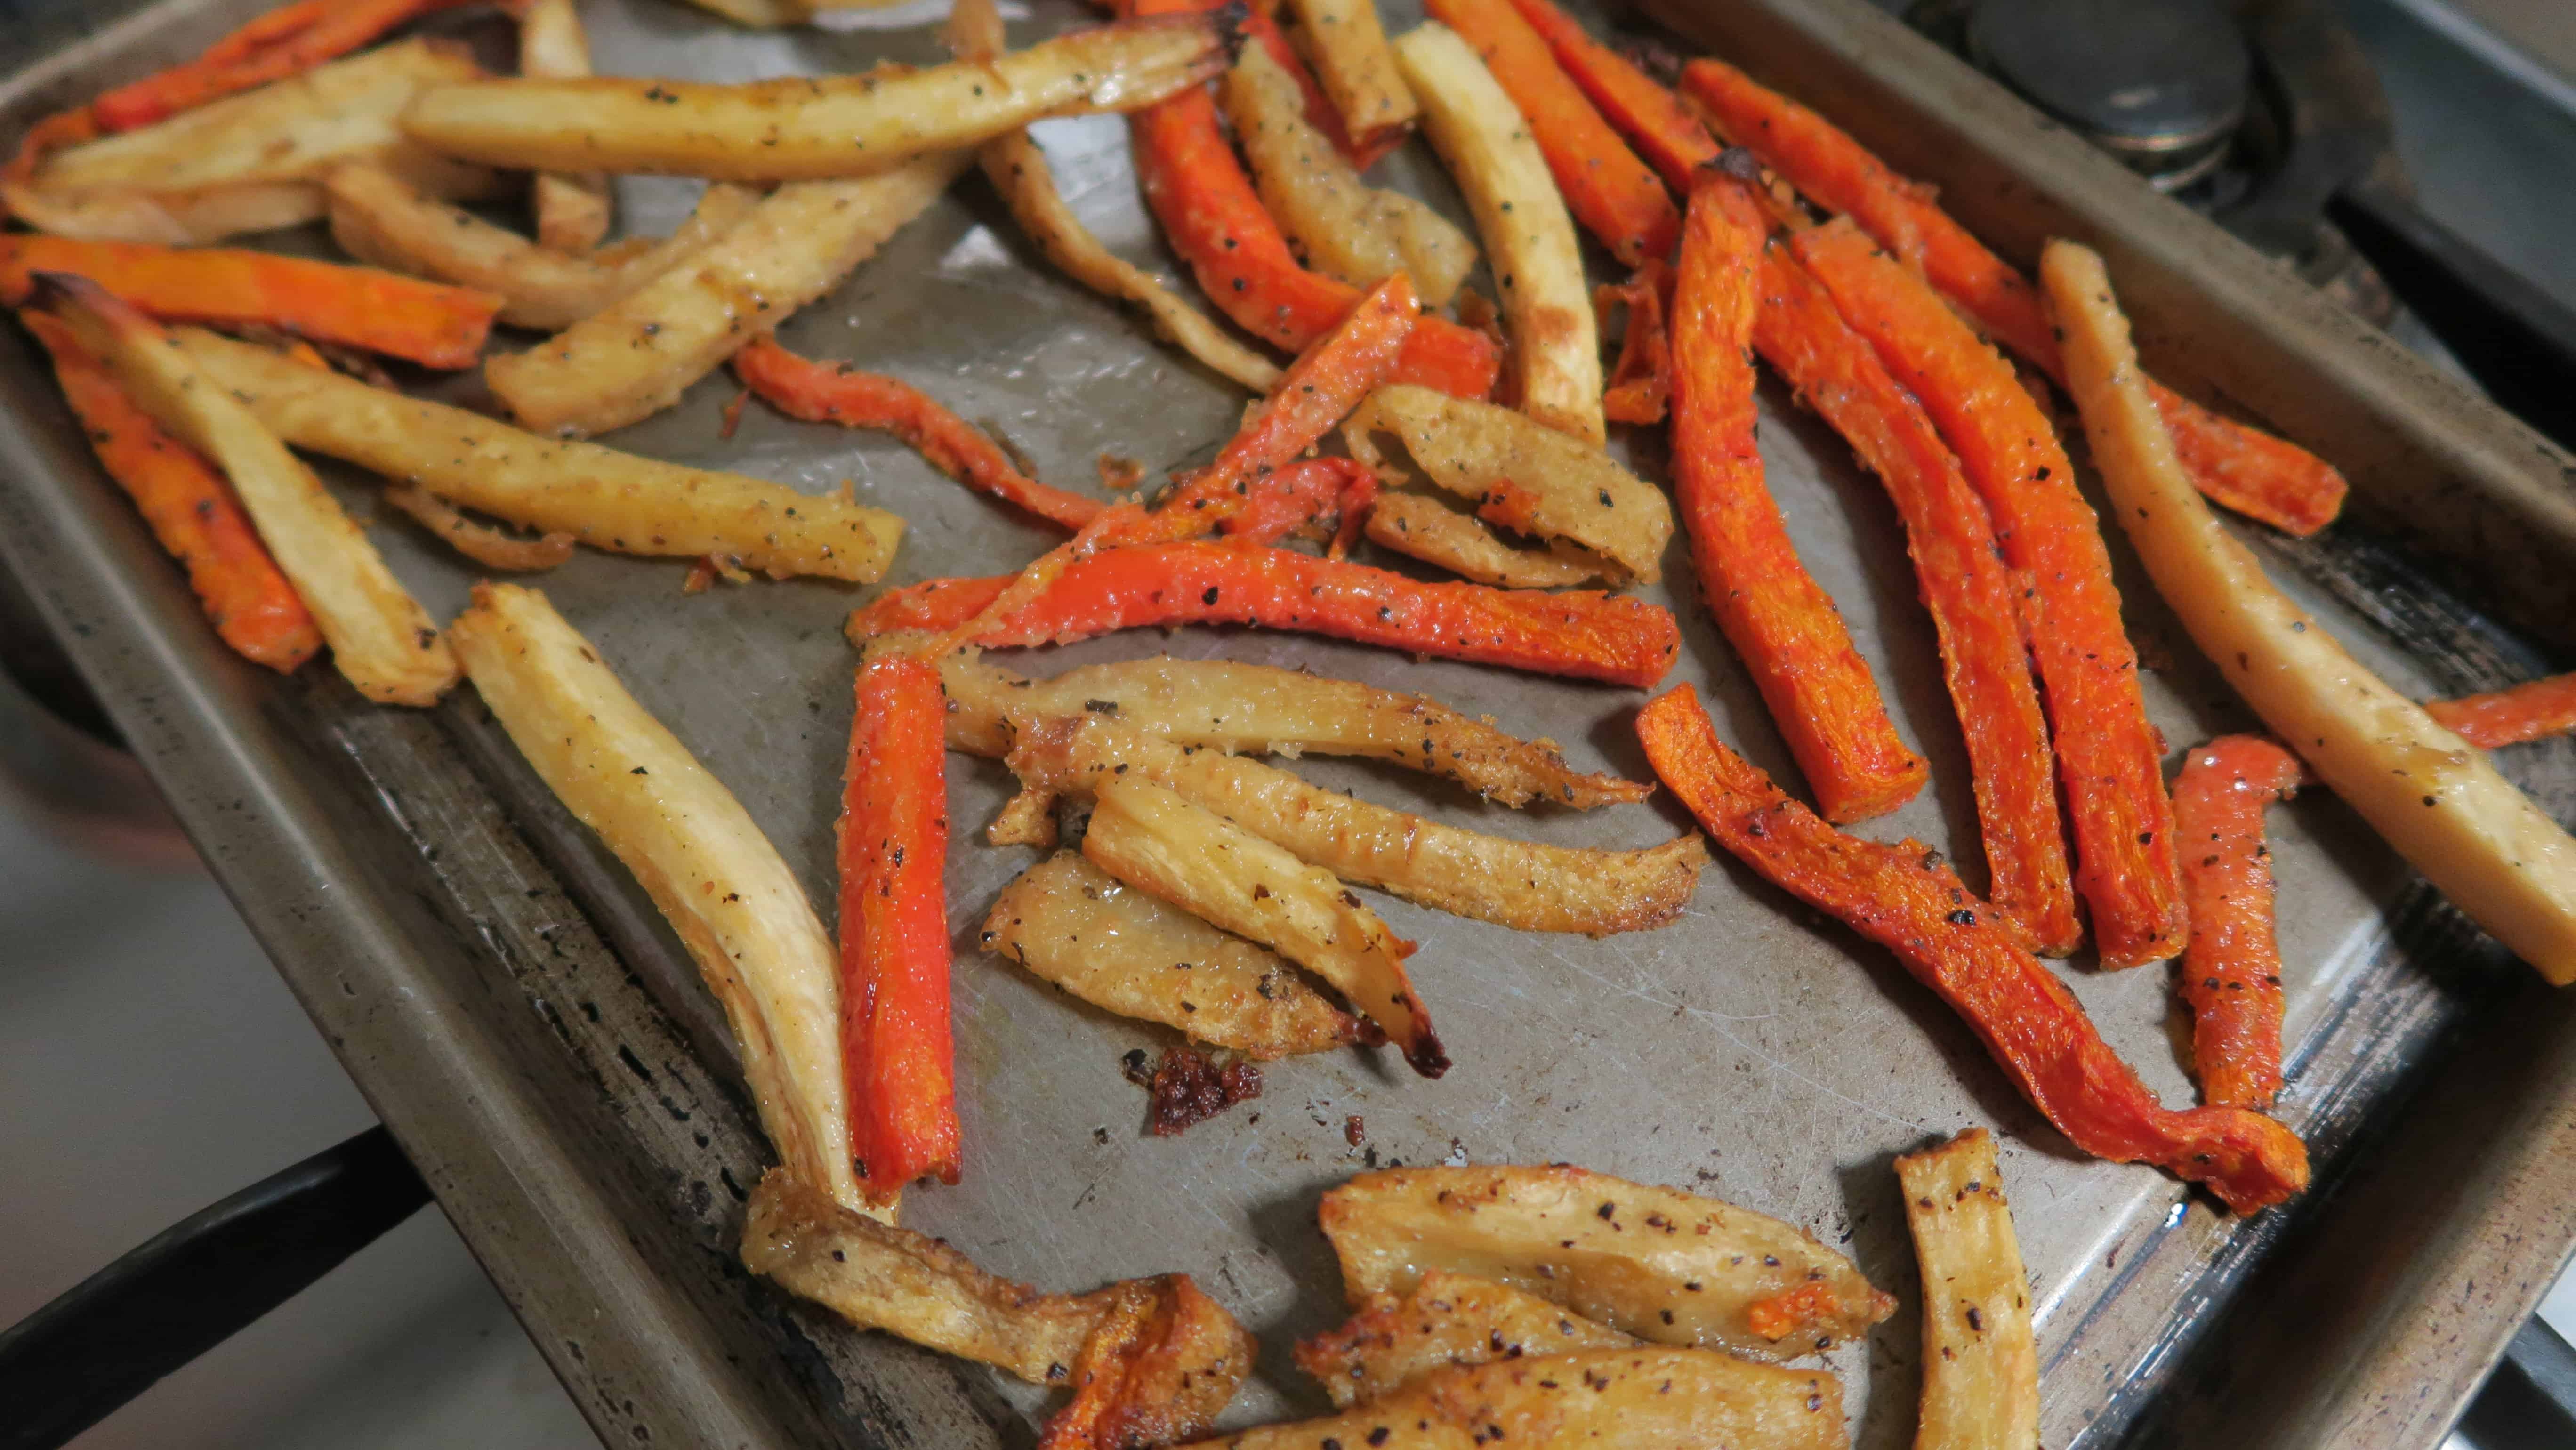 Carrot and parnsip fries mash direct gluten free 